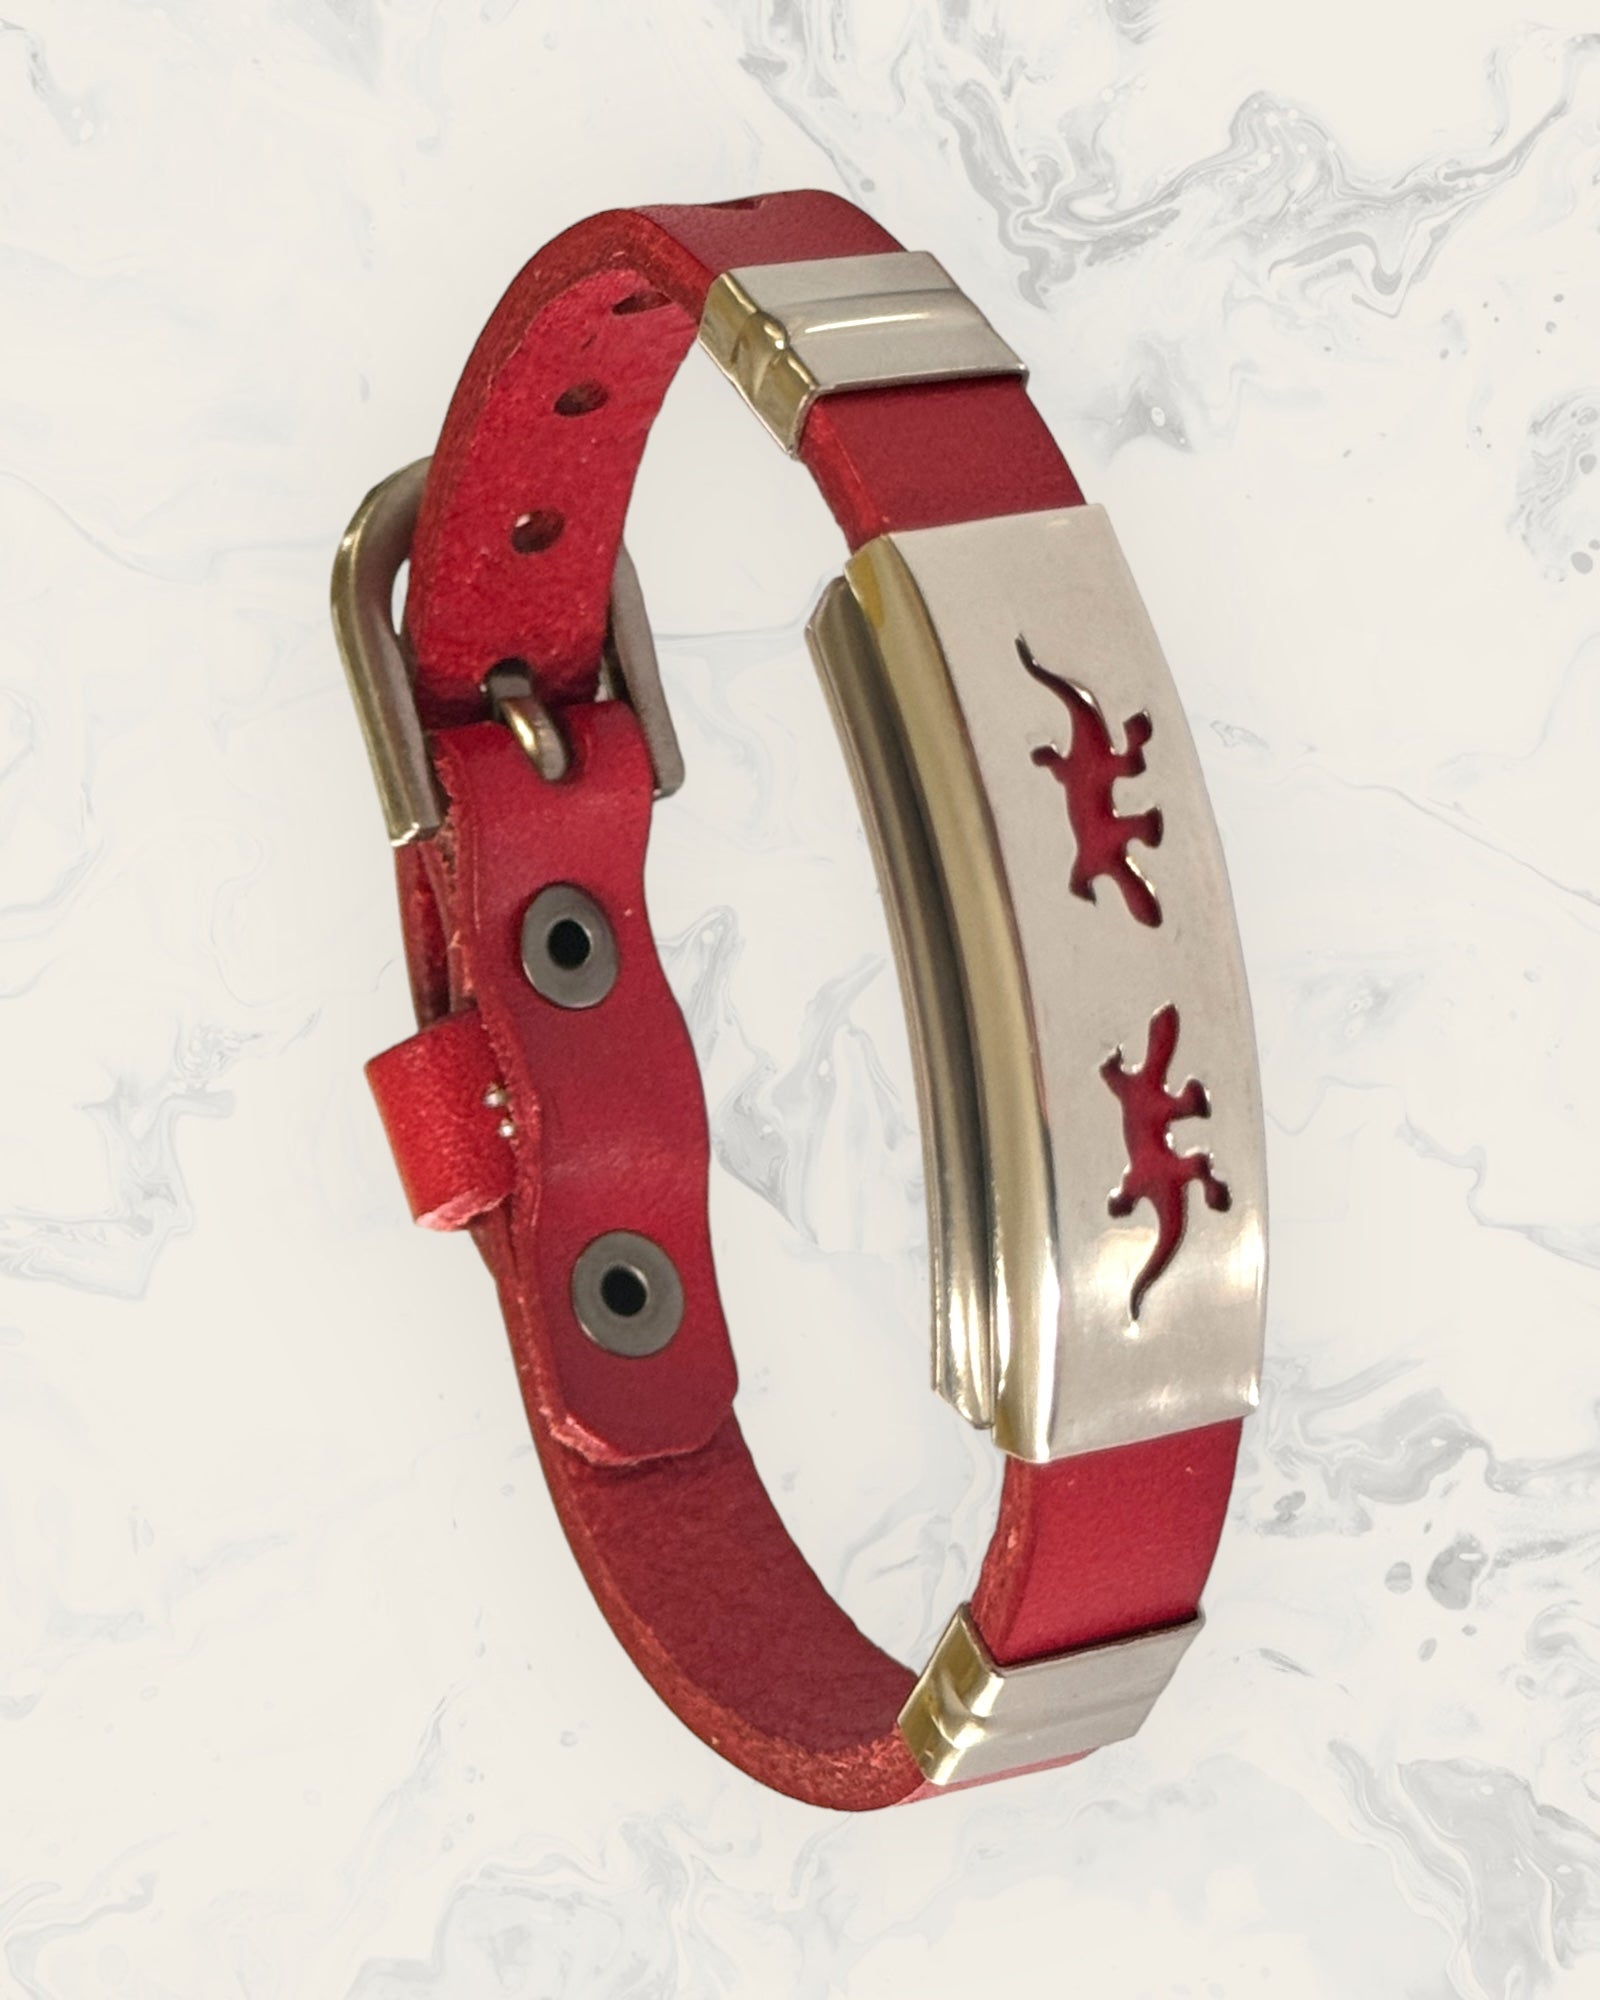 Frequency Jewelry Natural Pain Relief and EMF Protection Bracelet Leather Band Color Red with Two Gecko design on a silver metal slider